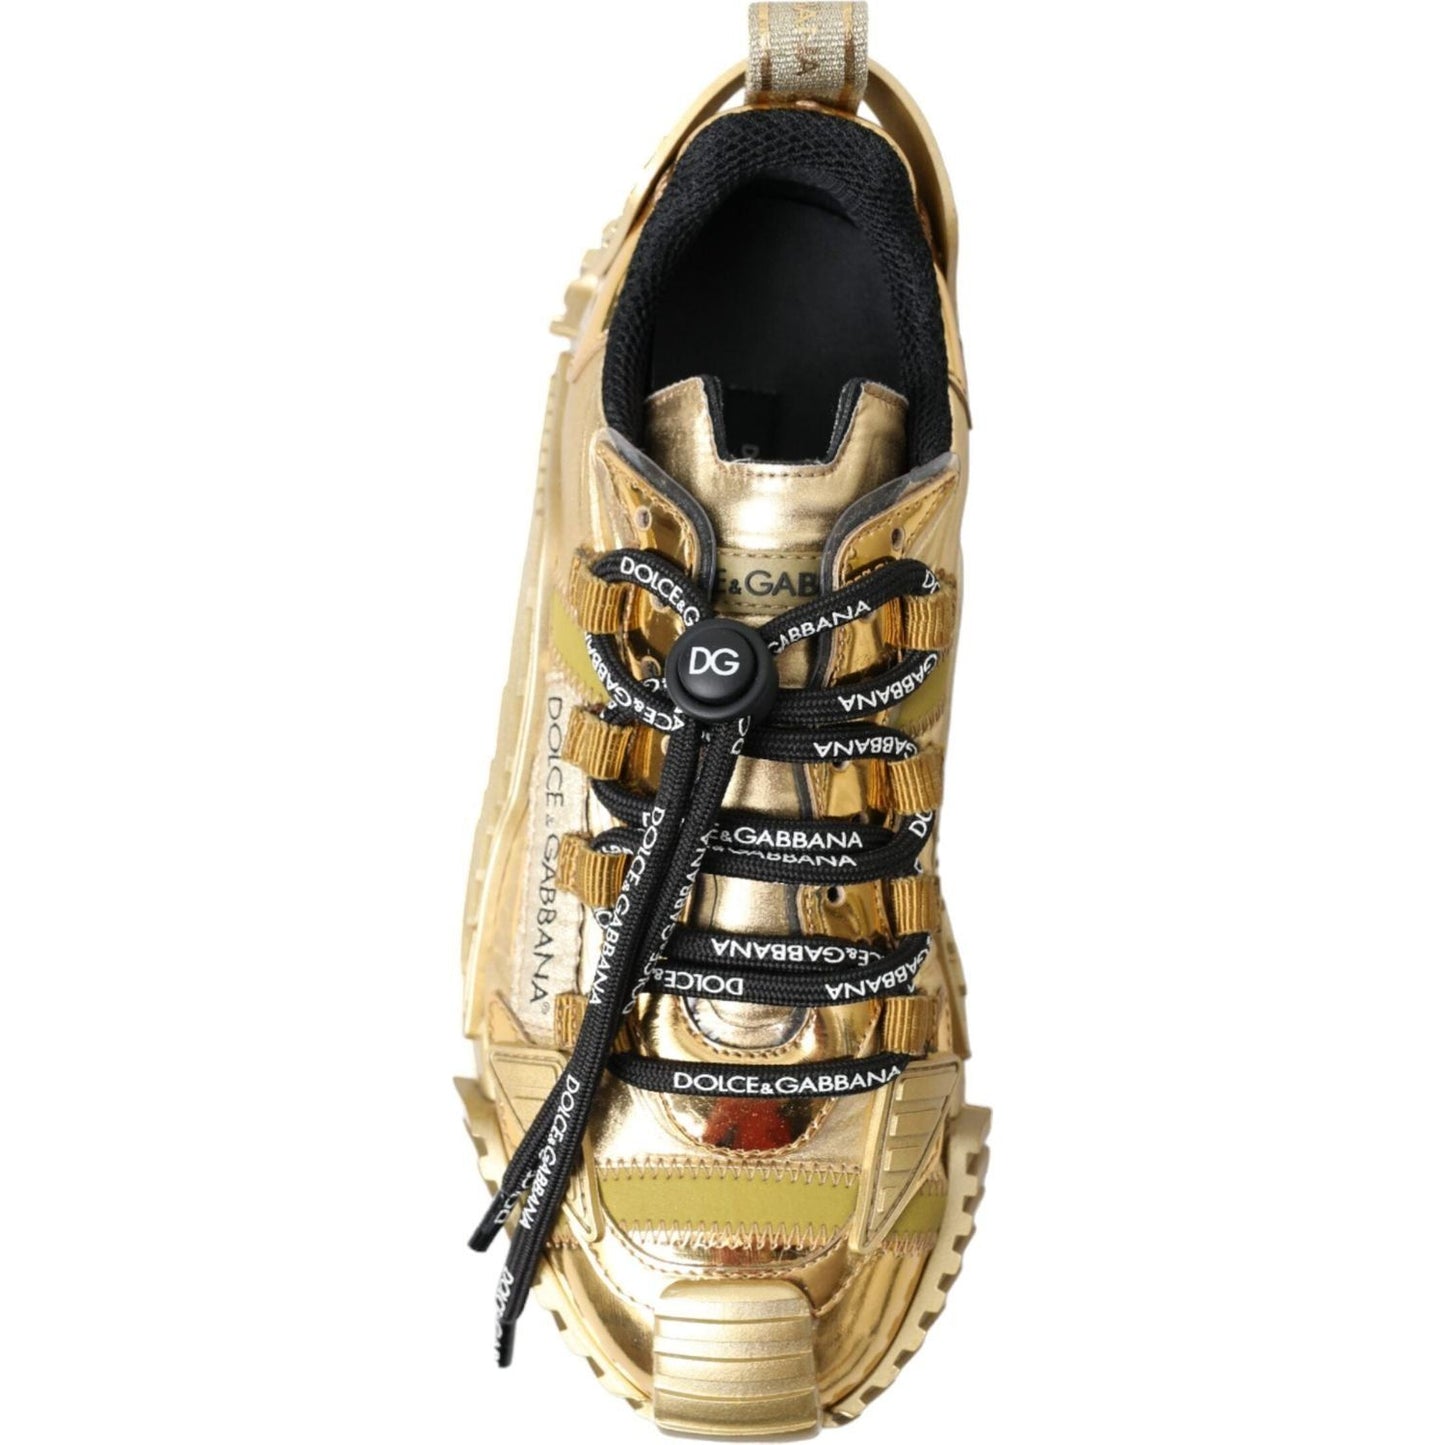 Dolce & Gabbana D&G Gleaming Gold-Toned Luxury Sneakers metallic-gold-ns1-low-top-sneakers-shoes 465A2198-BG-scaled-8a7b6e71-e6e.jpg